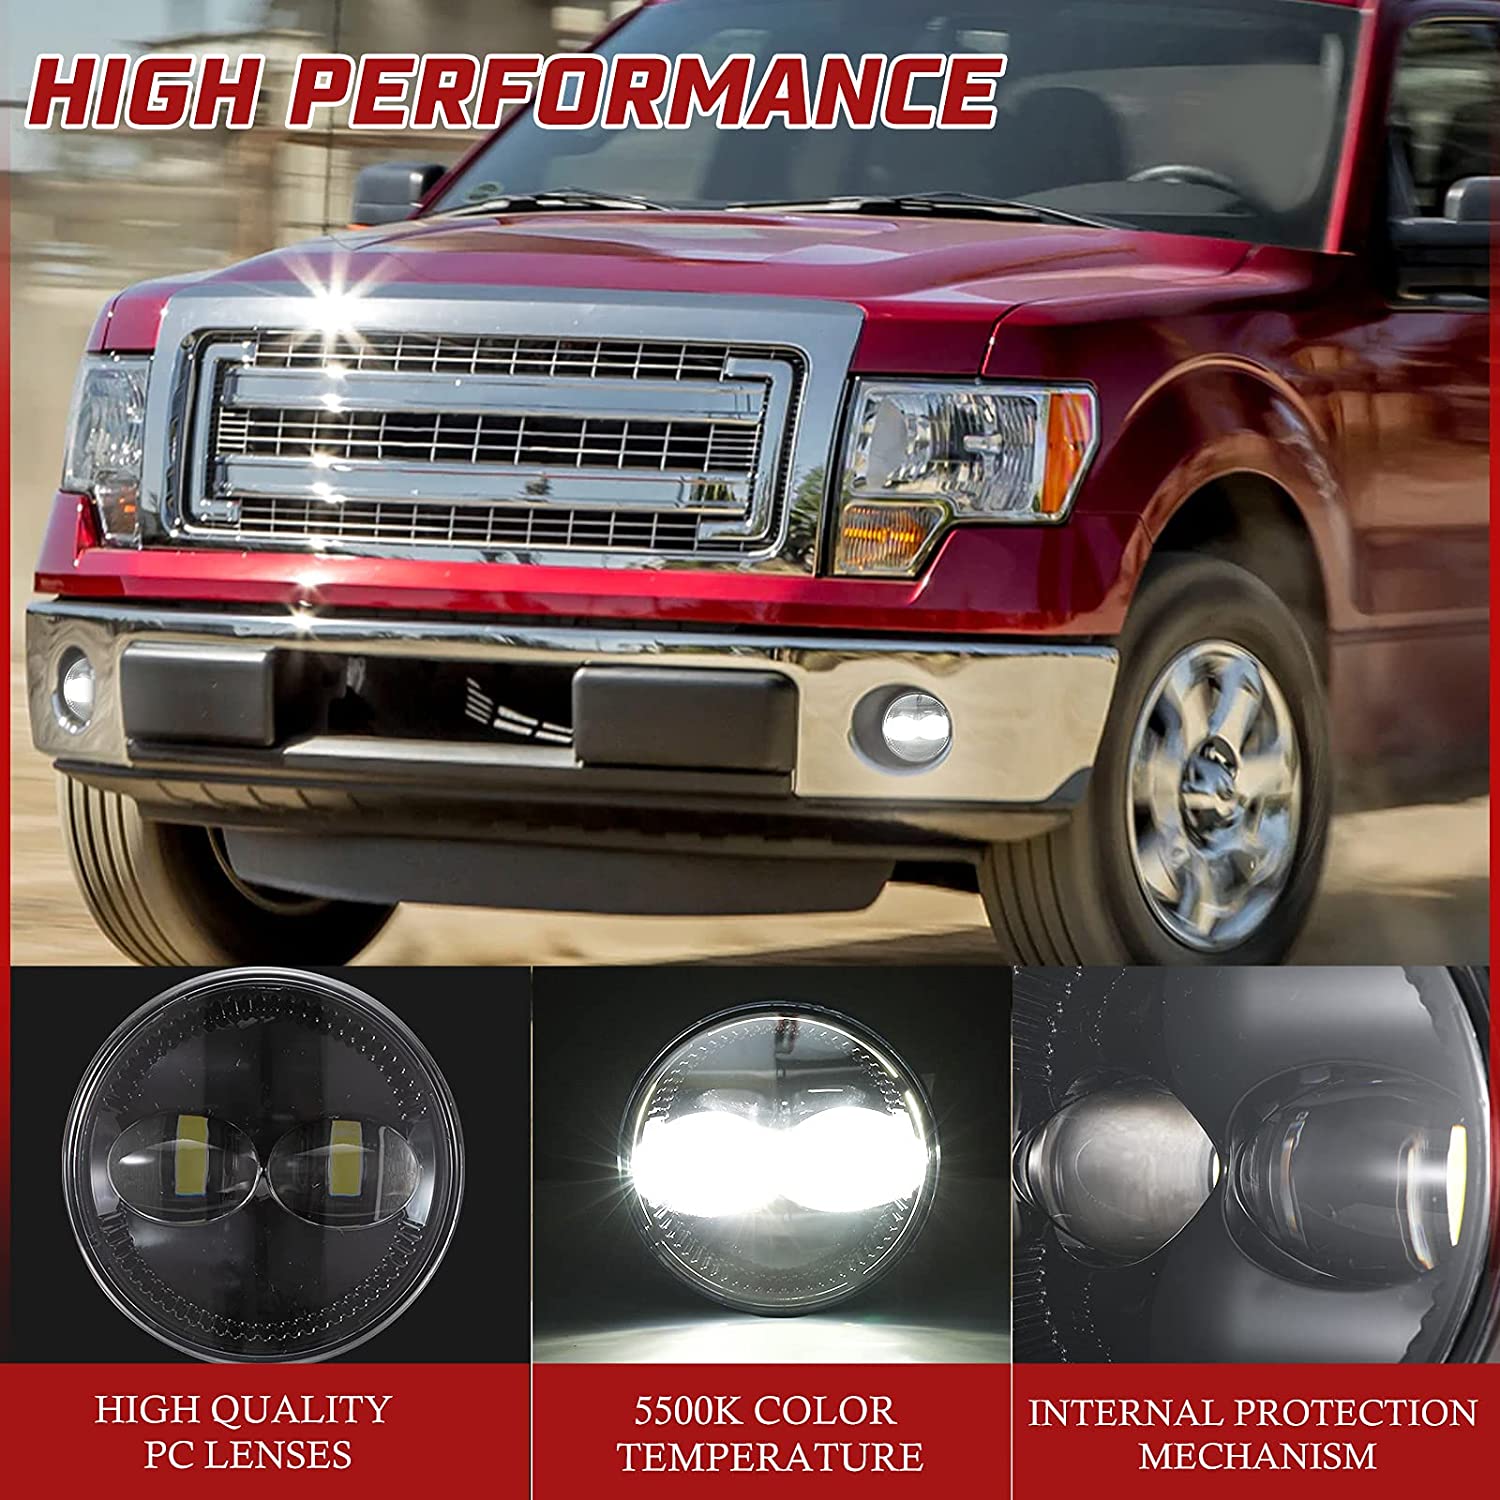 4.5 "Inch Ford LED Round Work Light F150 2009-2014